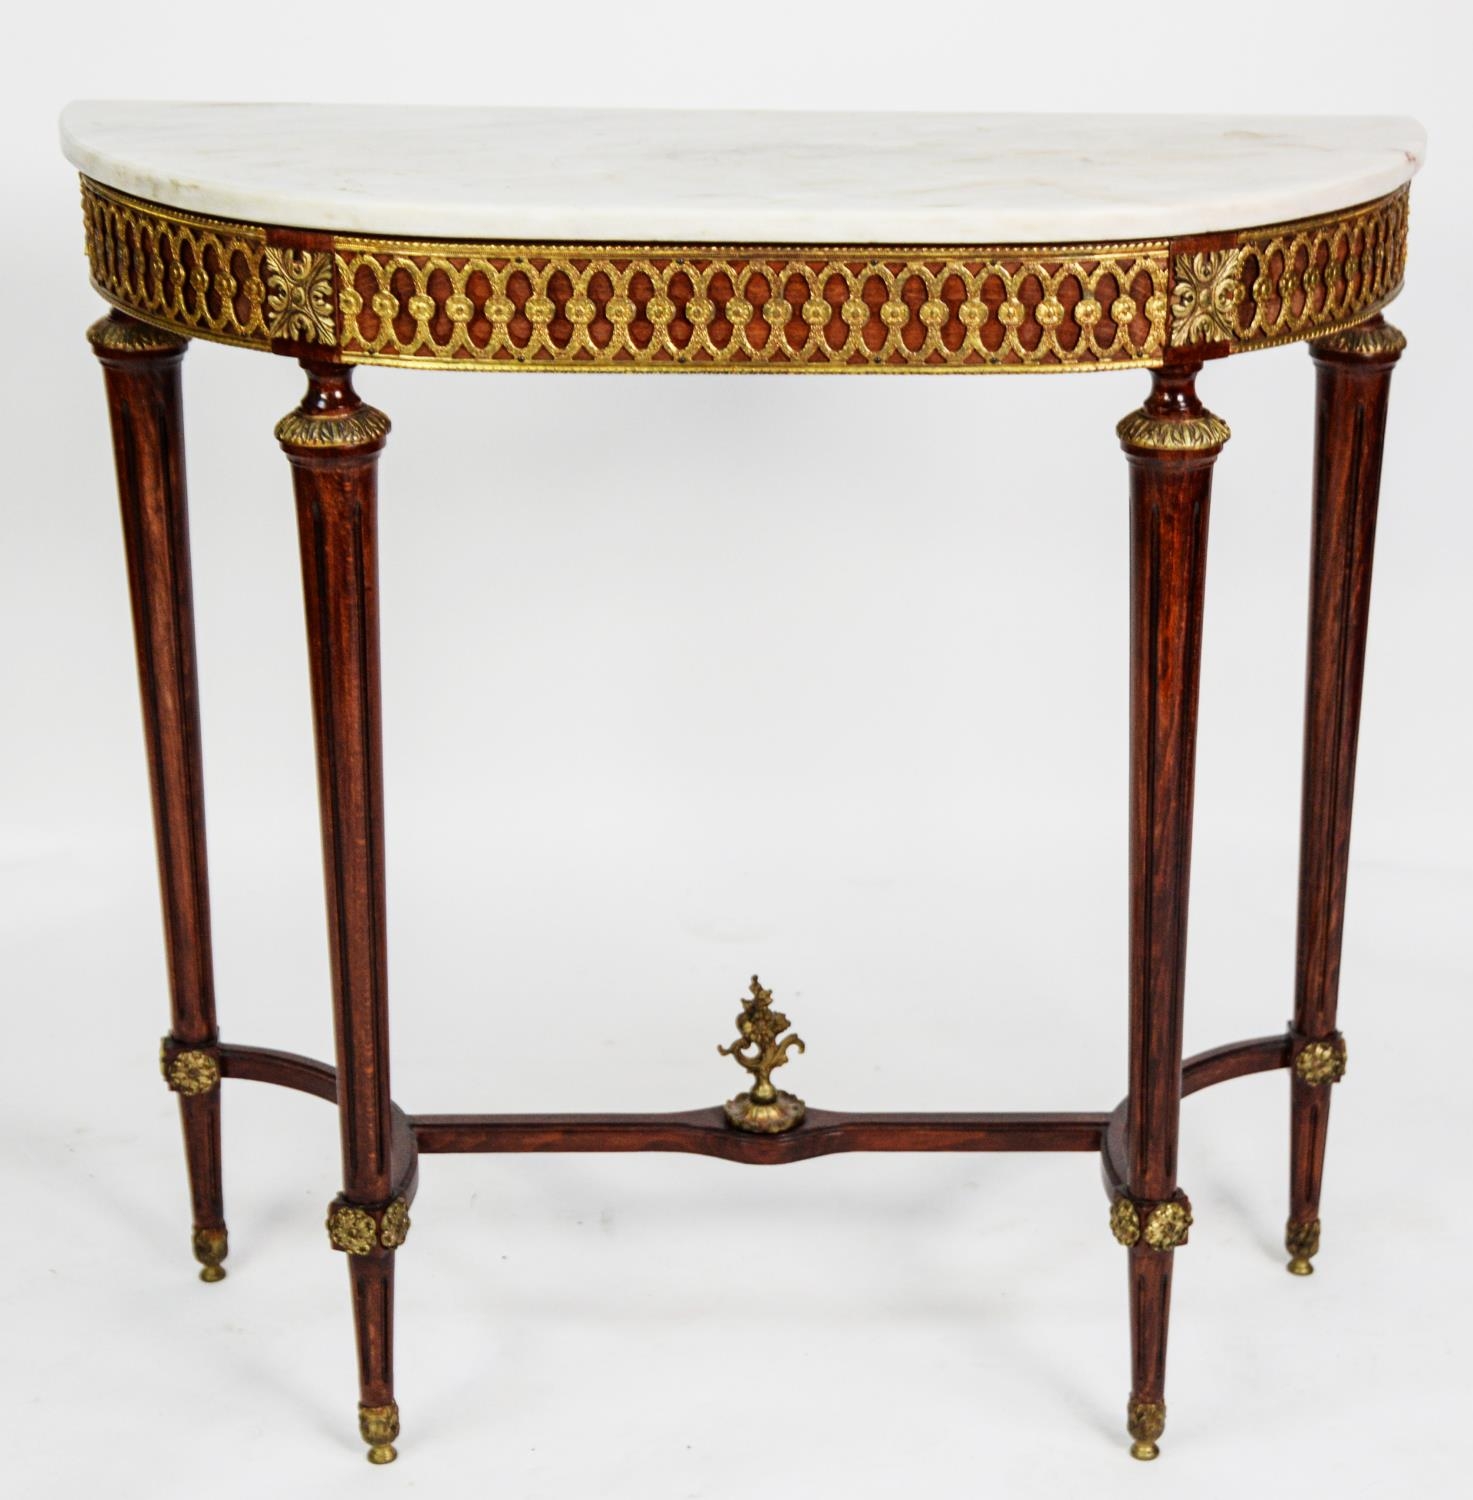 LOUIS XVI STYLE GILT METAL MOUNTED MAHOGANY SIDE TABLE WITH WHITE VEINED MARBLE TOP, the D shaped - Image 2 of 3